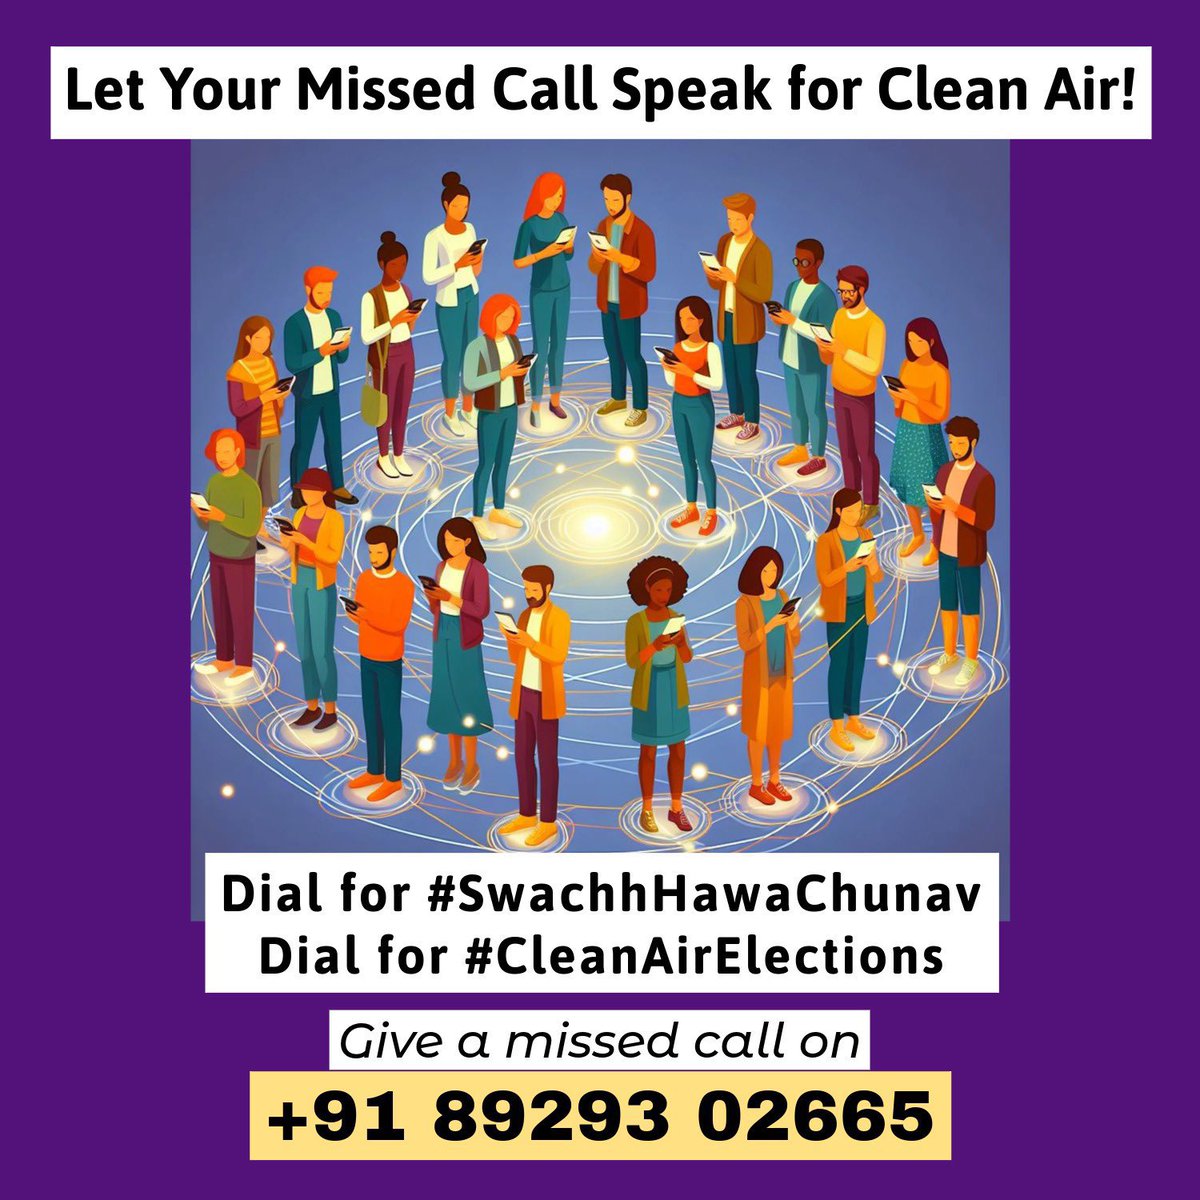 Do we want to face round- the-year air pollution? Let political candidates know #ourhealthmatters. 

We demand clean air. Just click and call: +918929302665

#PrioritizePublicHealth
#SwachhHawaChunav

@Warriormomsin